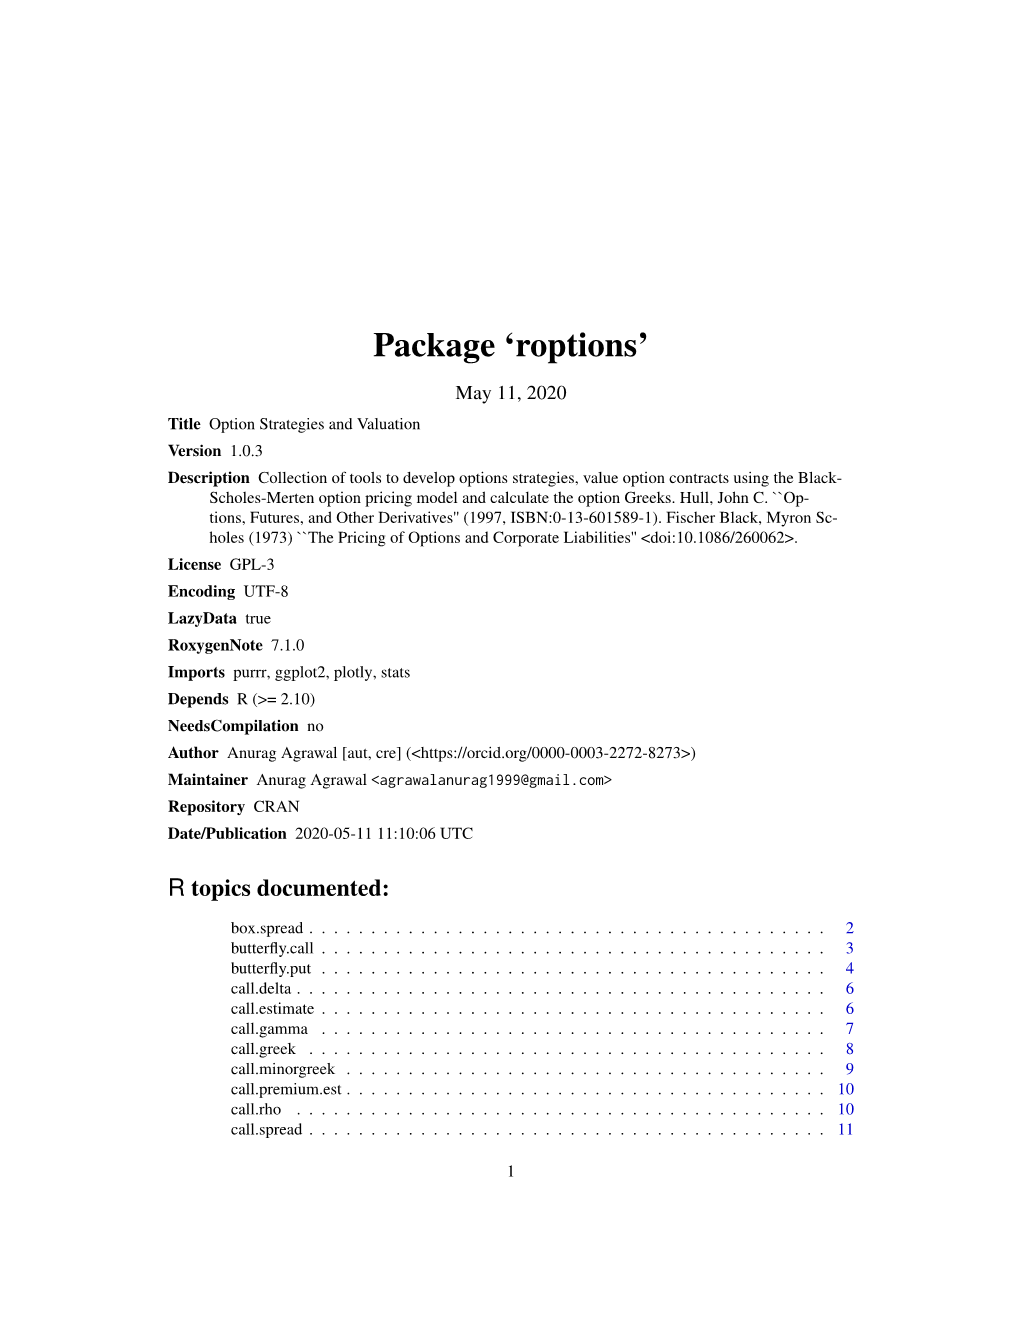 Package 'Roptions'